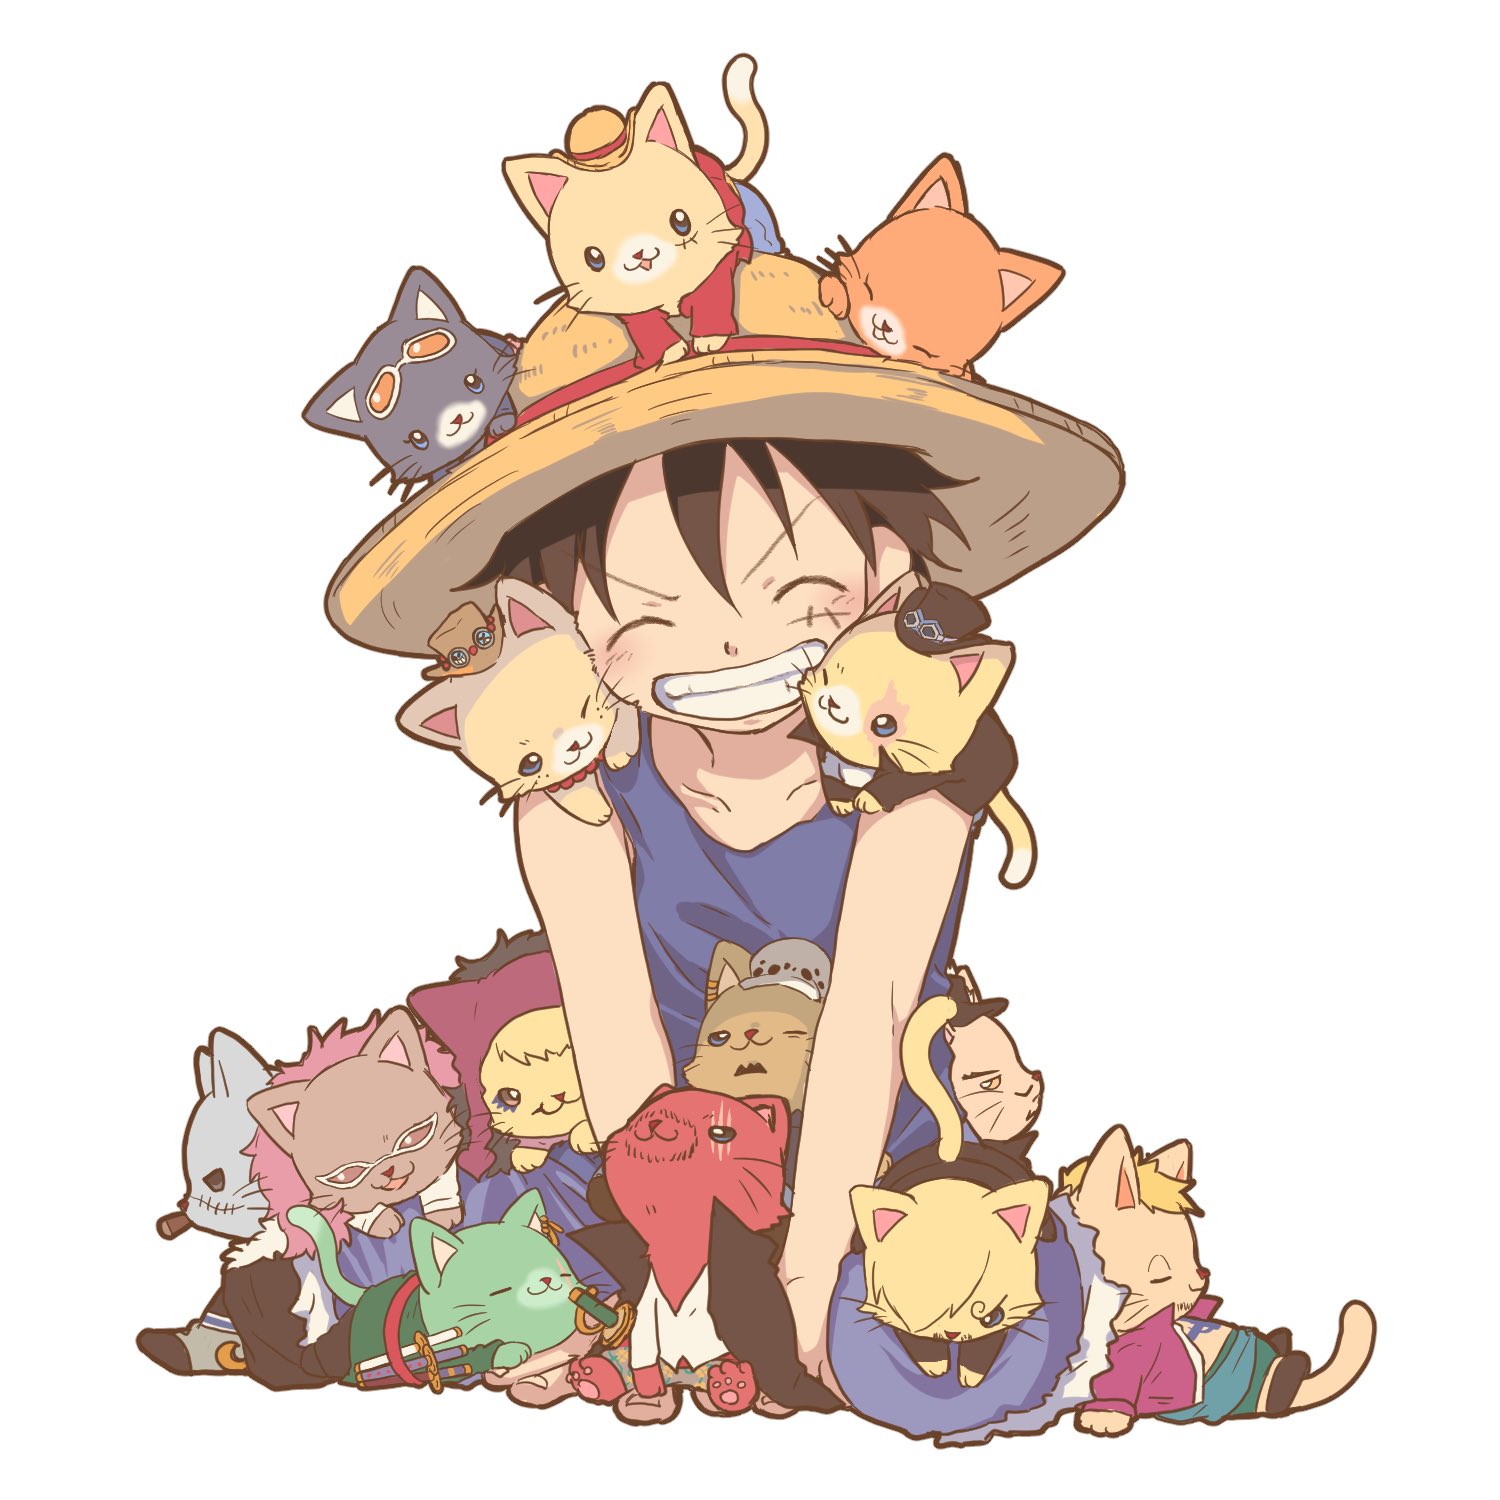 luffy with cats - One Piece Wallpaper (44341170) - Fanpop